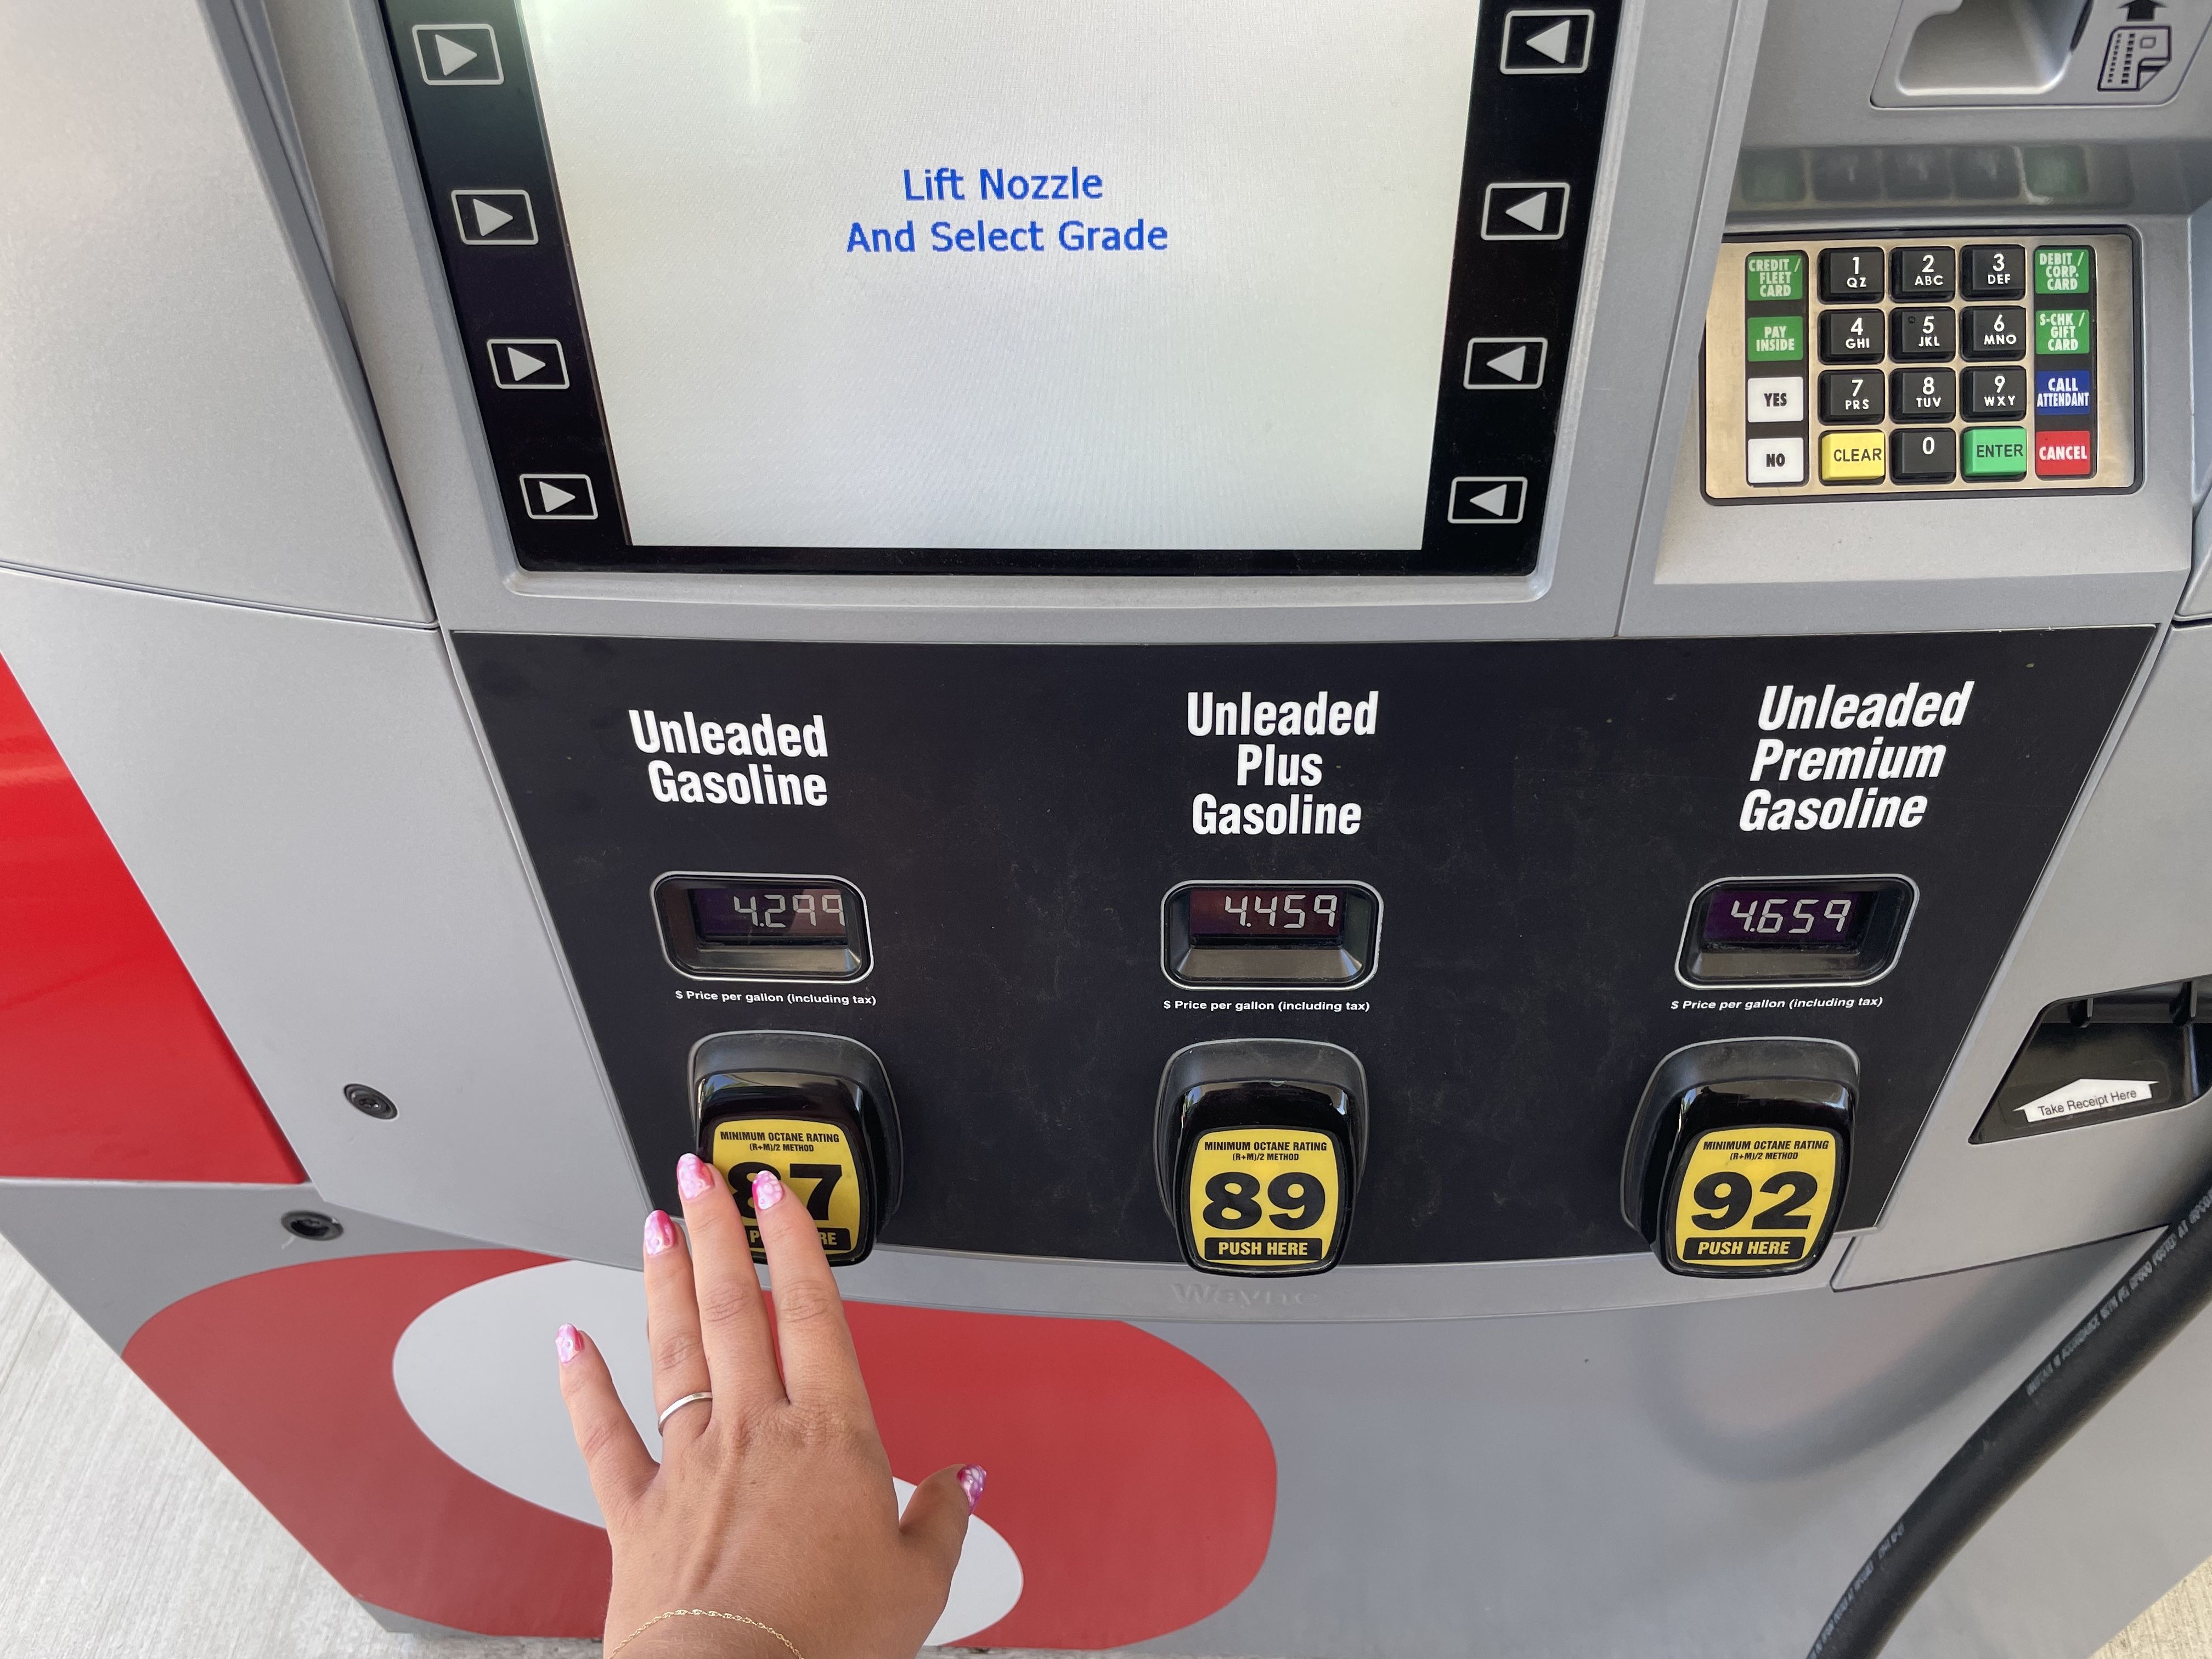 An image of a hand selecting a gasoline grade at a gas pump.